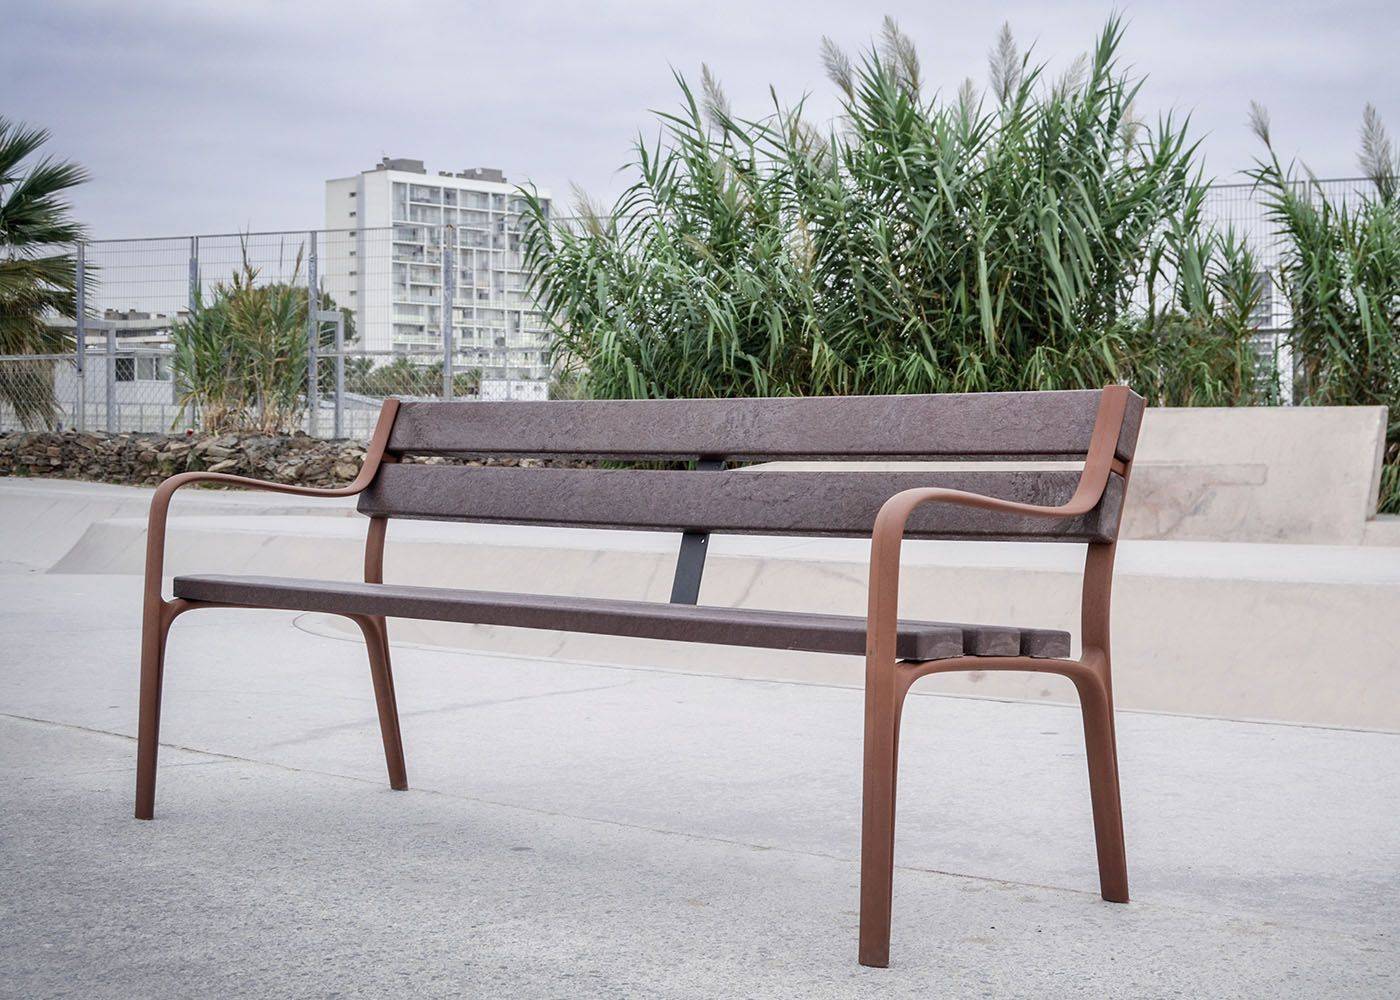 Benito Citizen Eco Recycled Park Bench